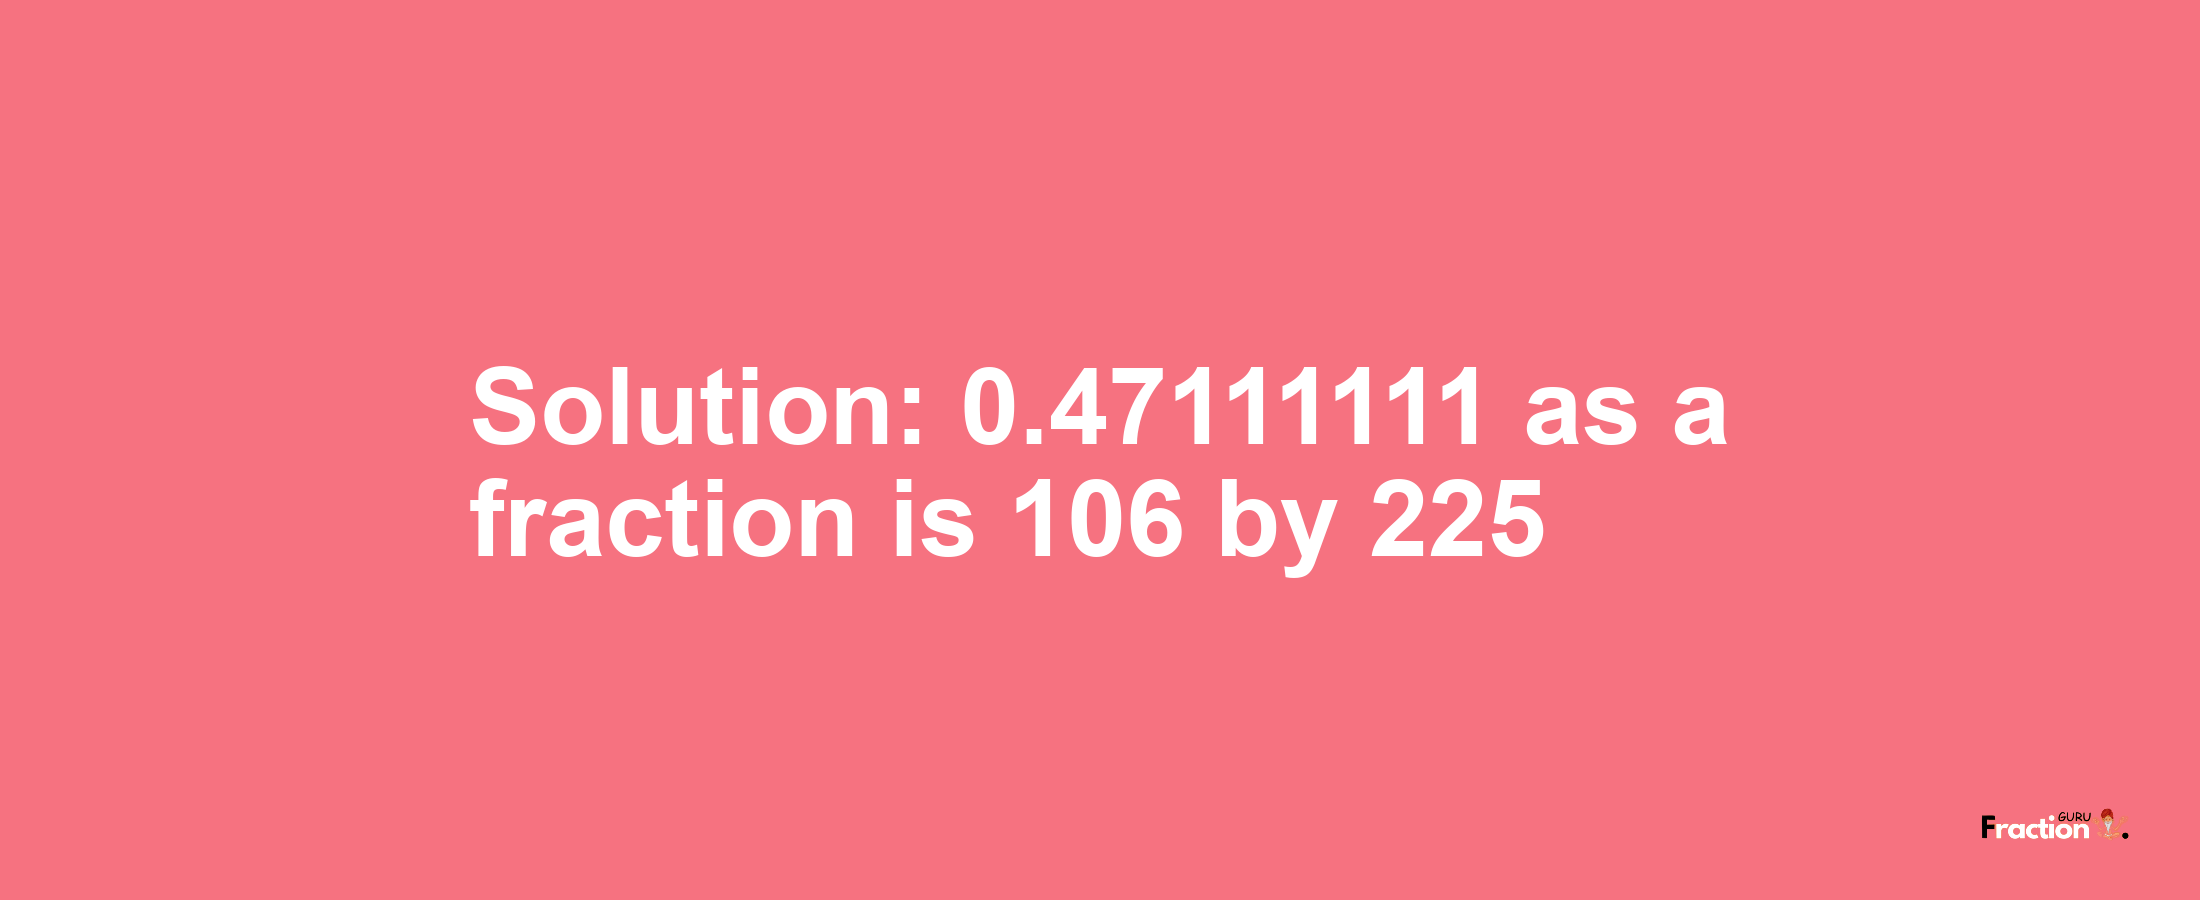 Solution:0.47111111 as a fraction is 106/225